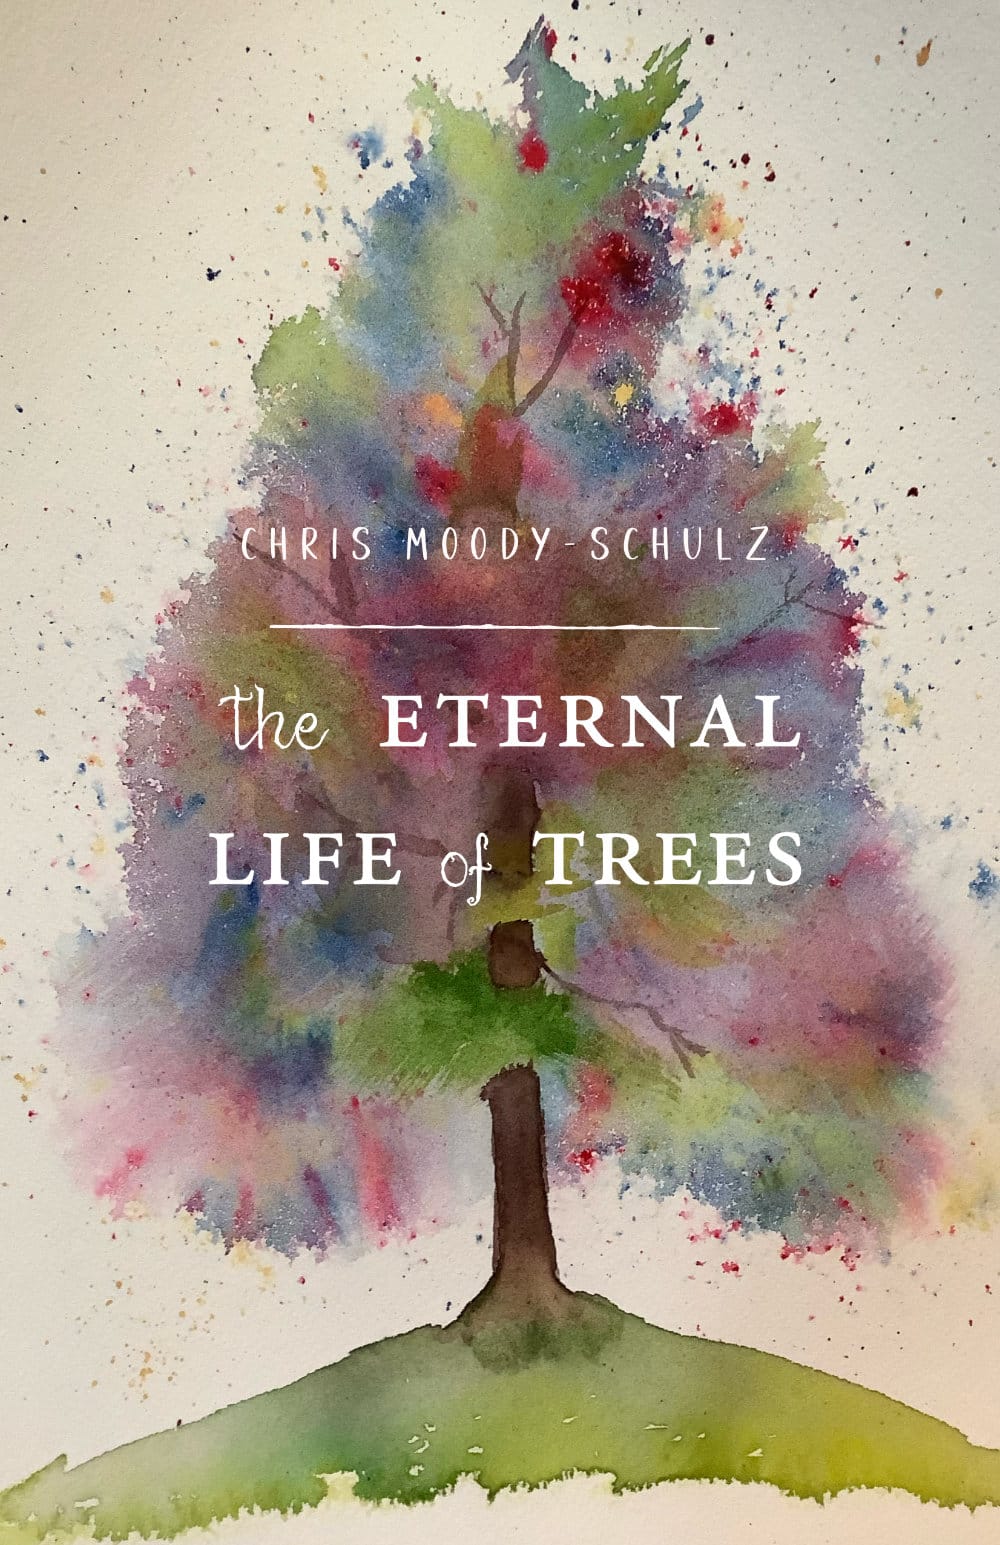 The Eternal Life of Trees